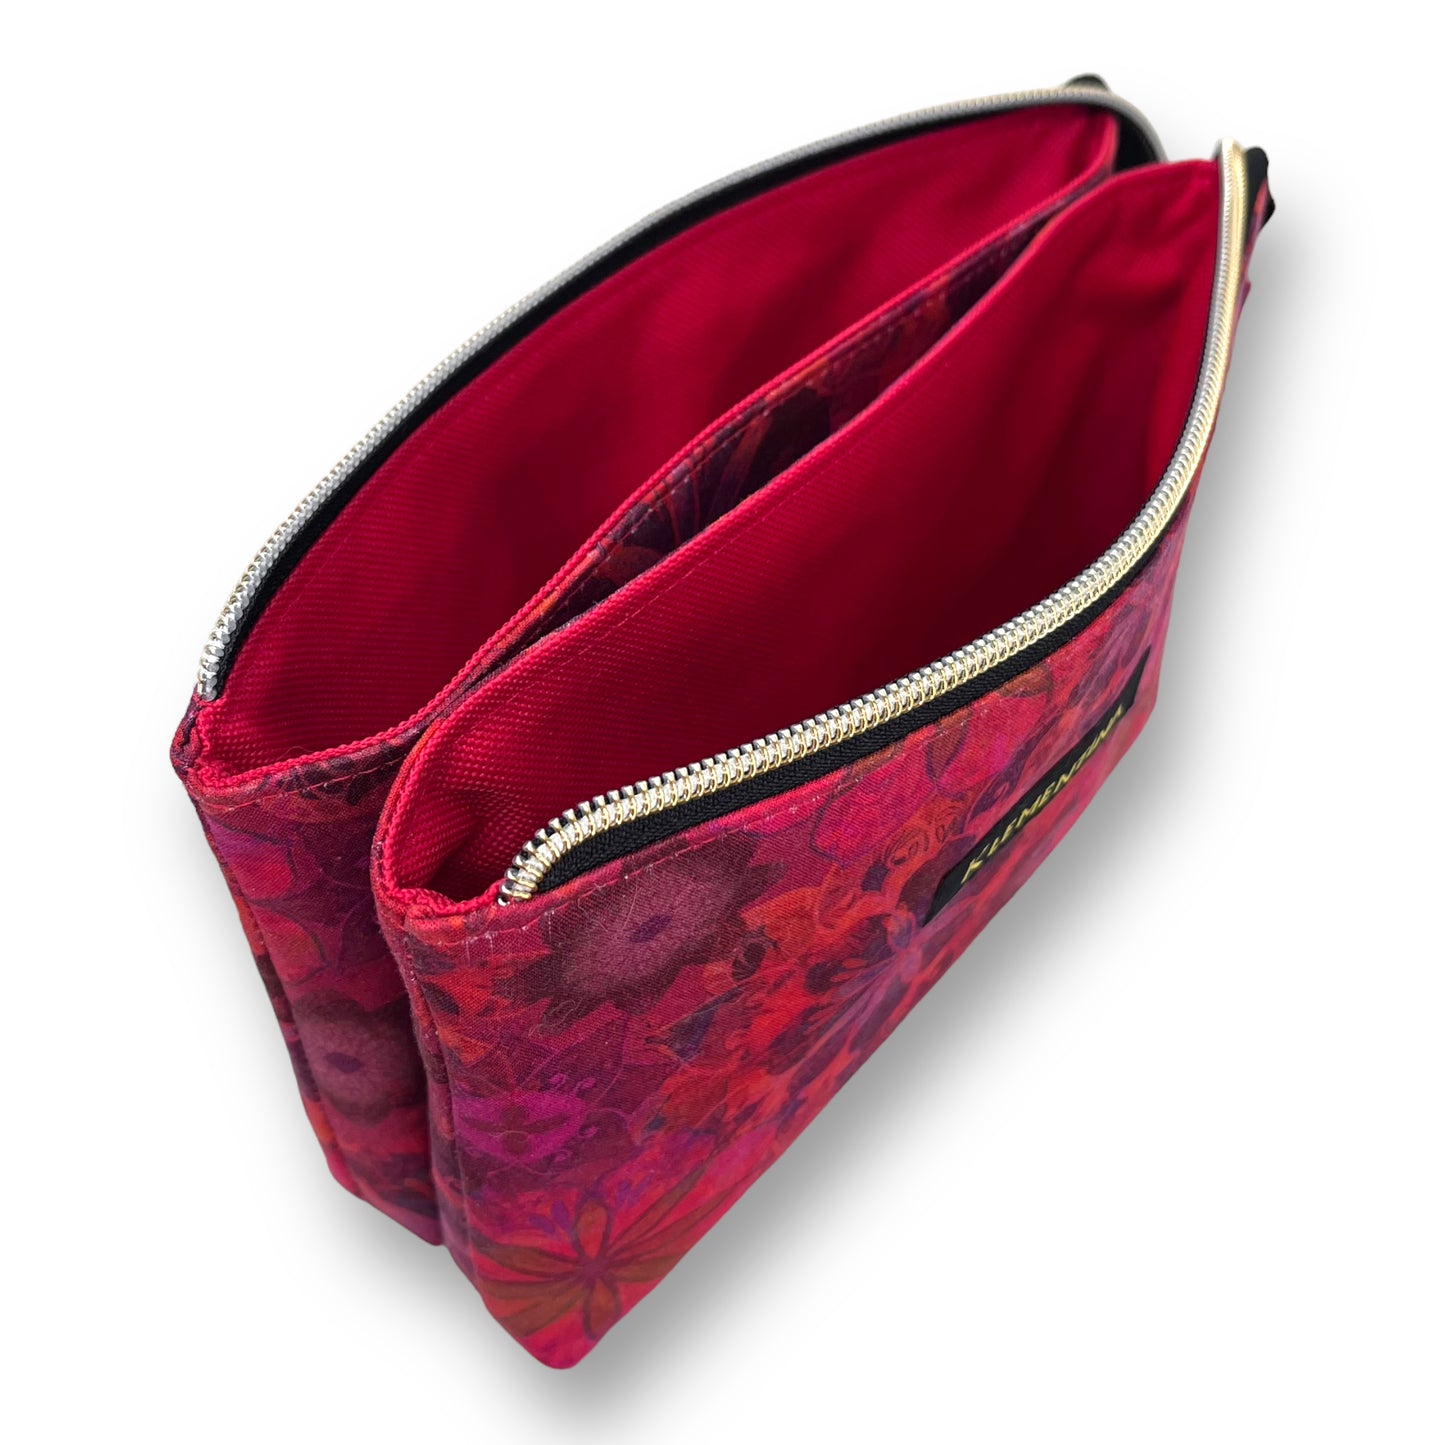 Red Floral Double Bag